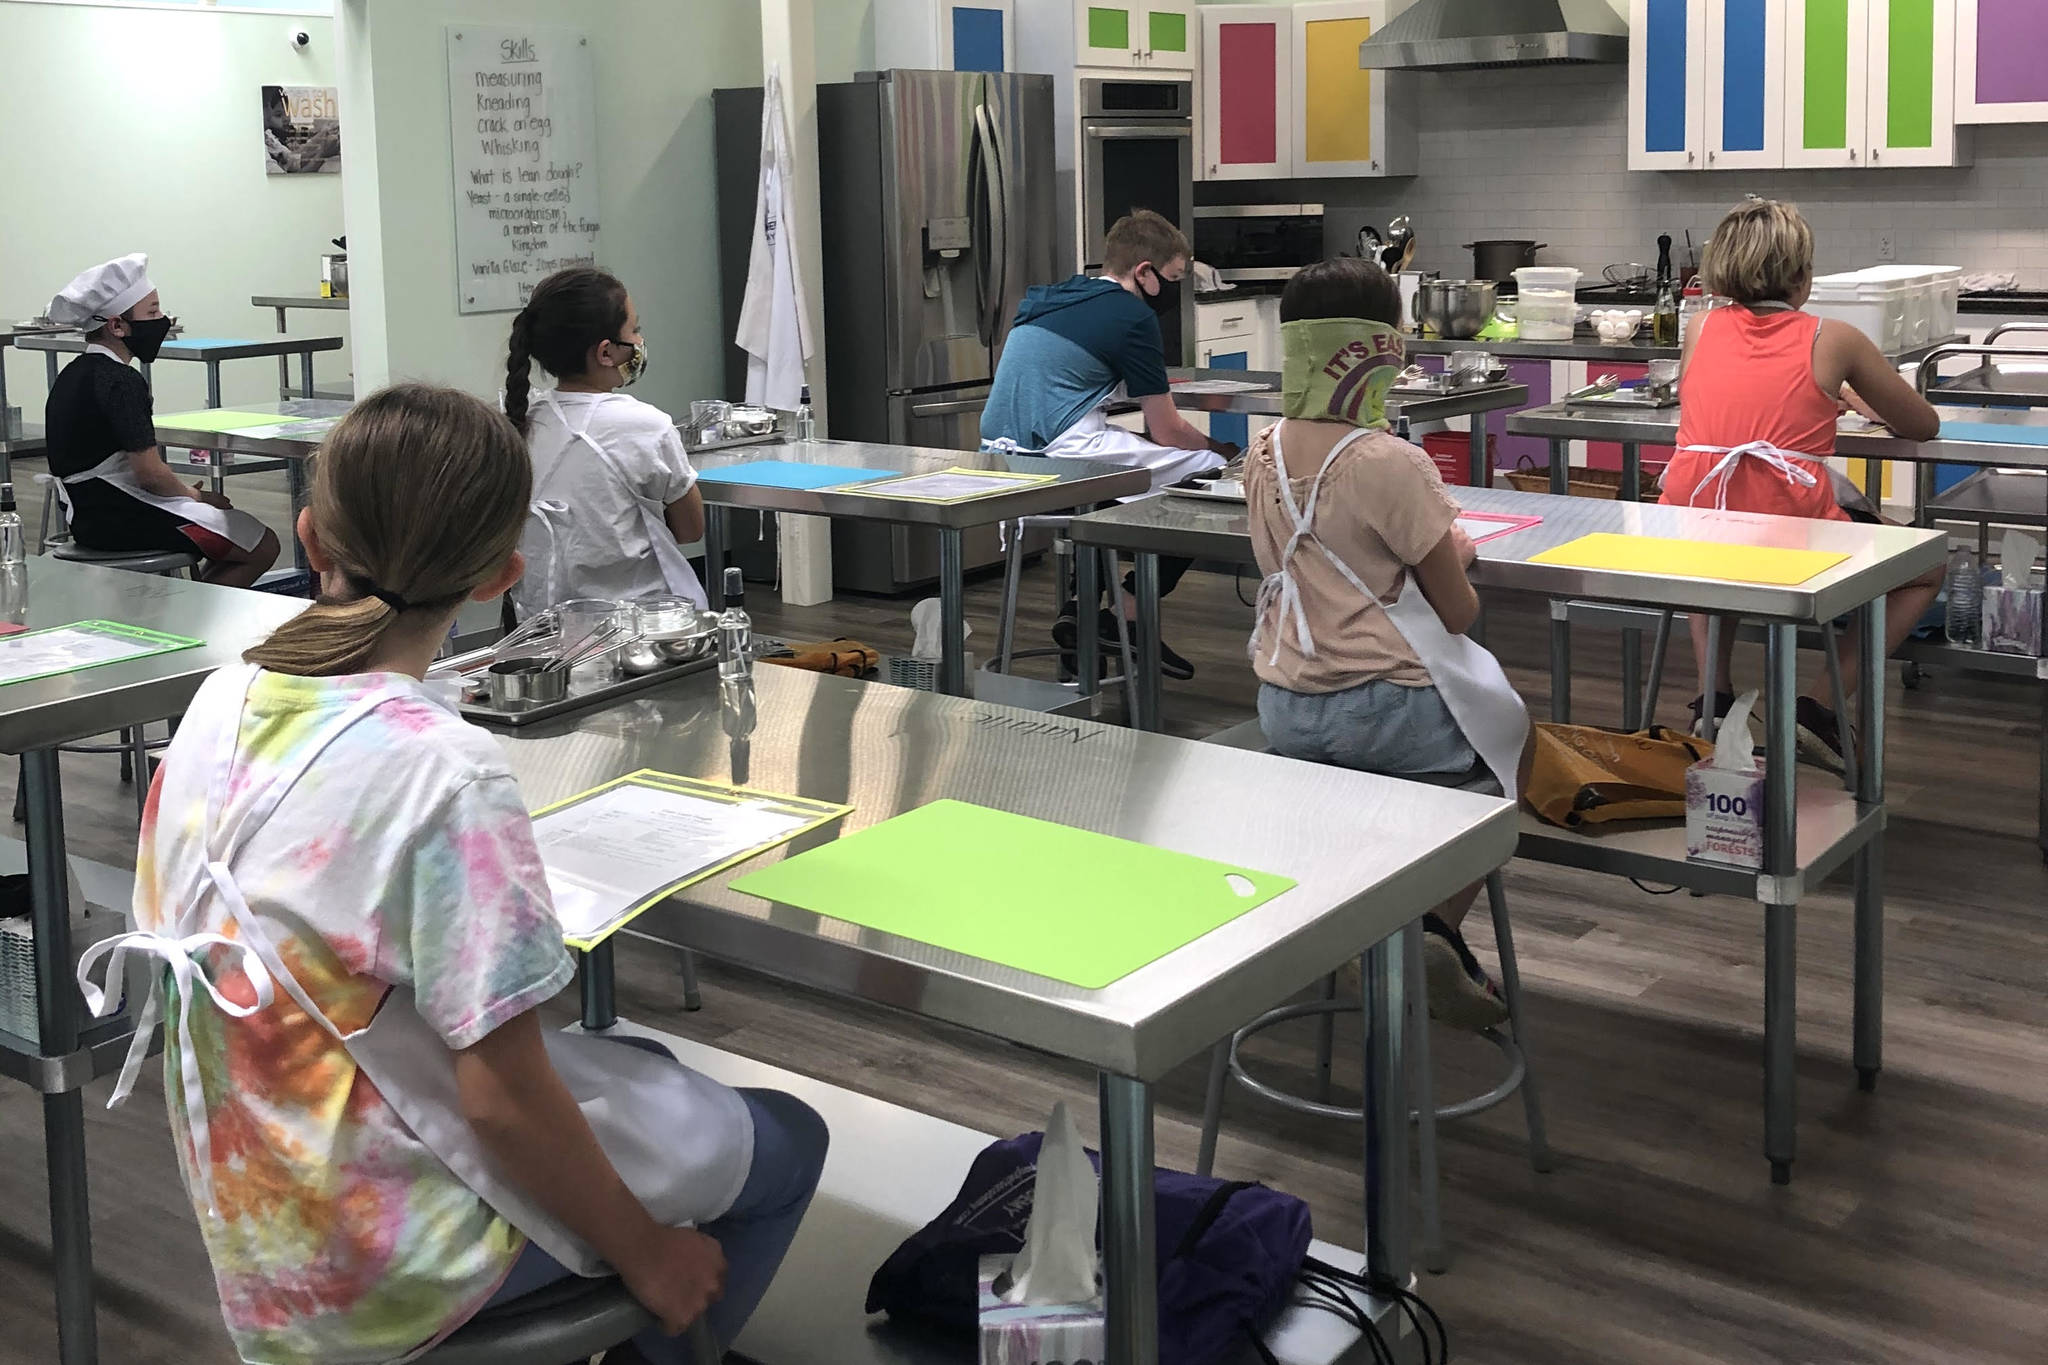 Kids find their stations for the first-ever cooking class at Young Chefs Academy Tuesday, June 23. The culinary arts school serves kids and teens in Covington and the surrounding areas. Courtesy photo/YCA Covington